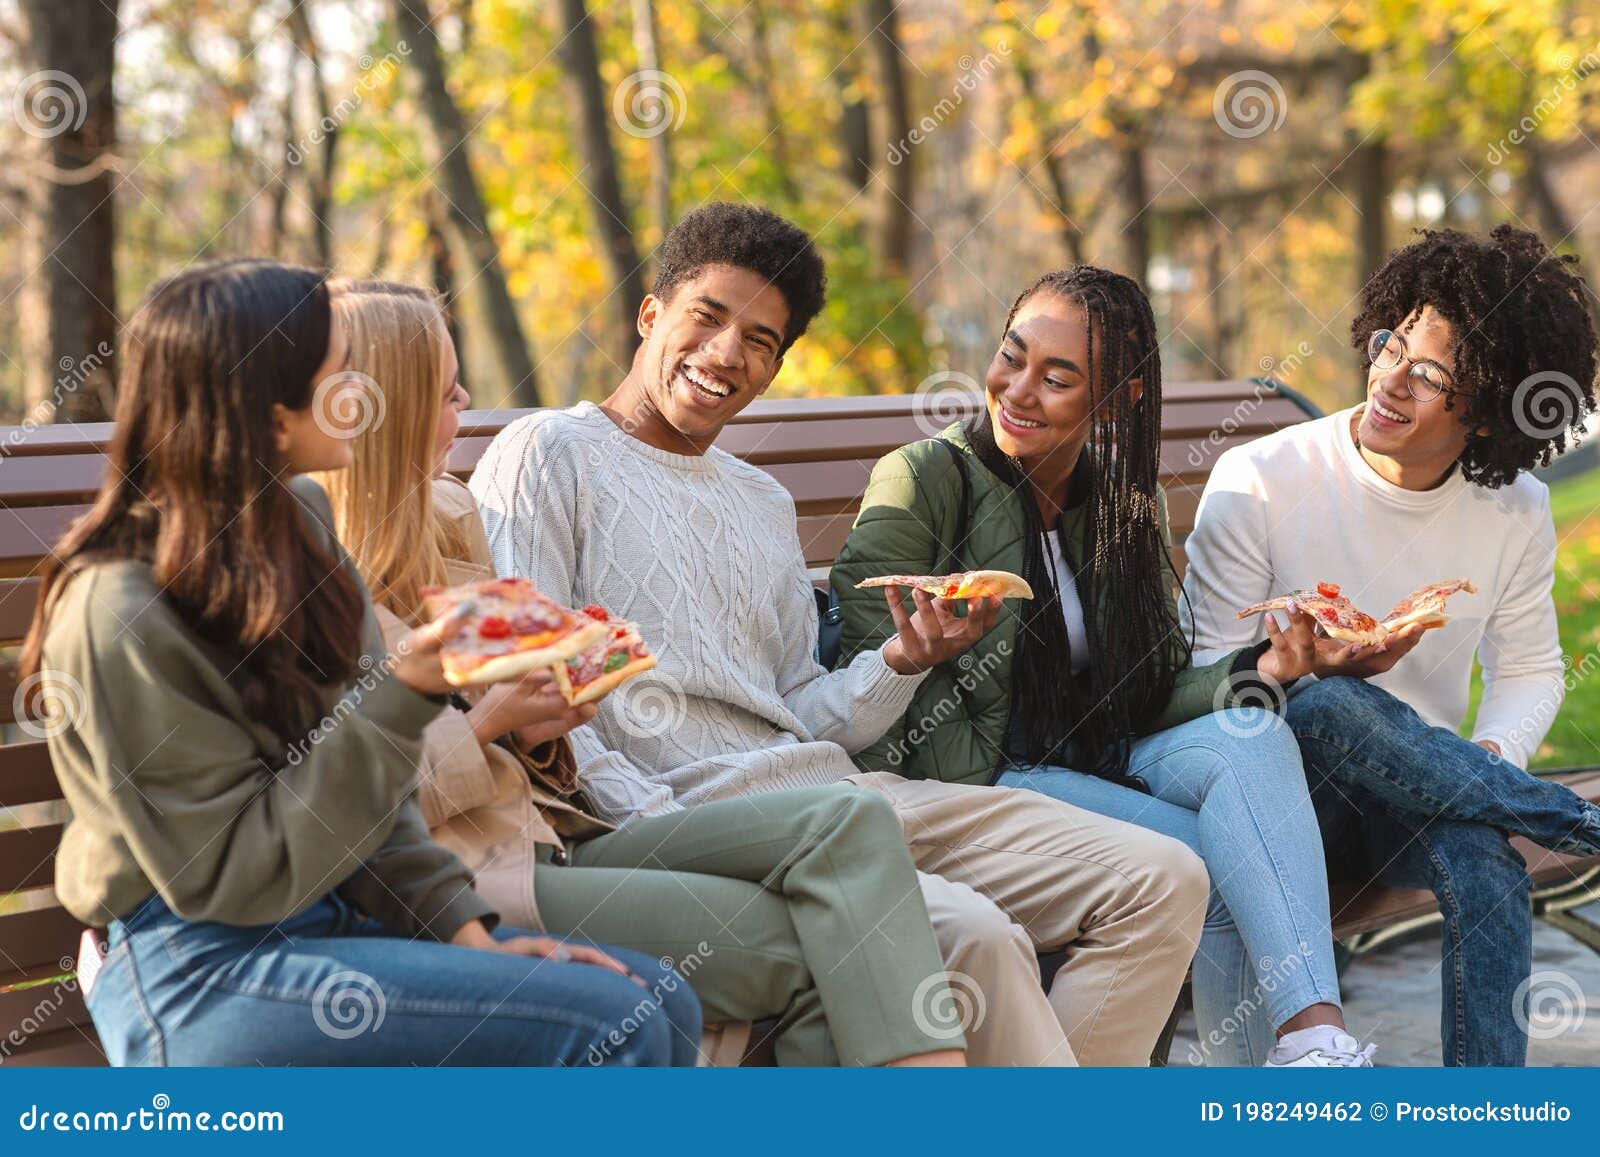 Black Guy Making Funny Jokes, Eating Pizza with Friends Stock Photo - Image  of female, beautiful: 198249462